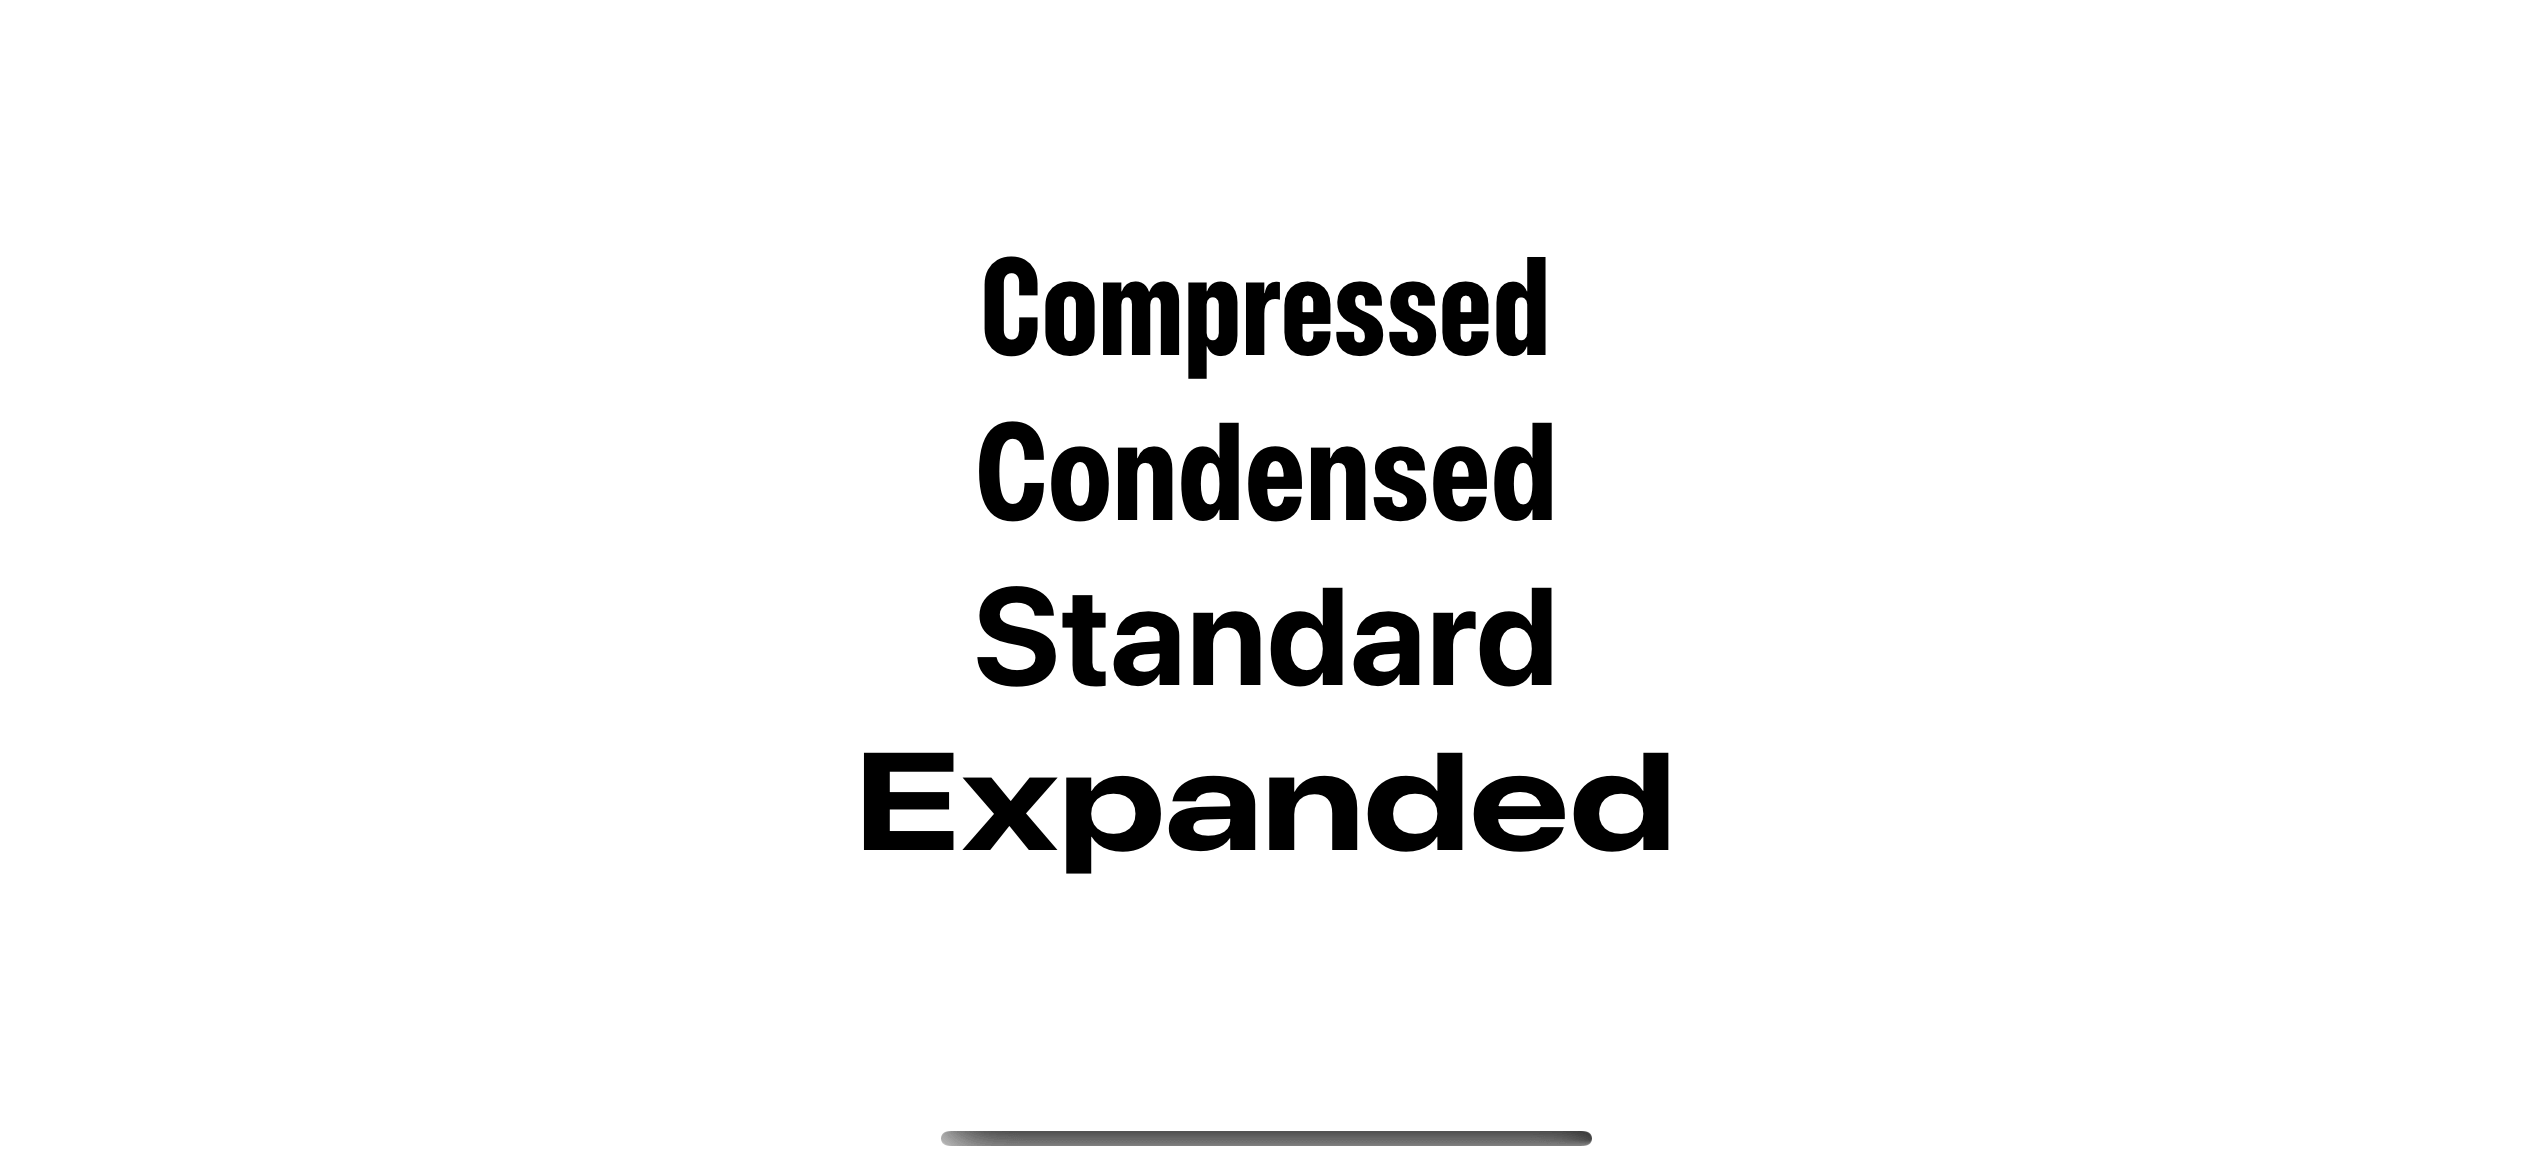 Compressed, Condensed, and Expanded font width.